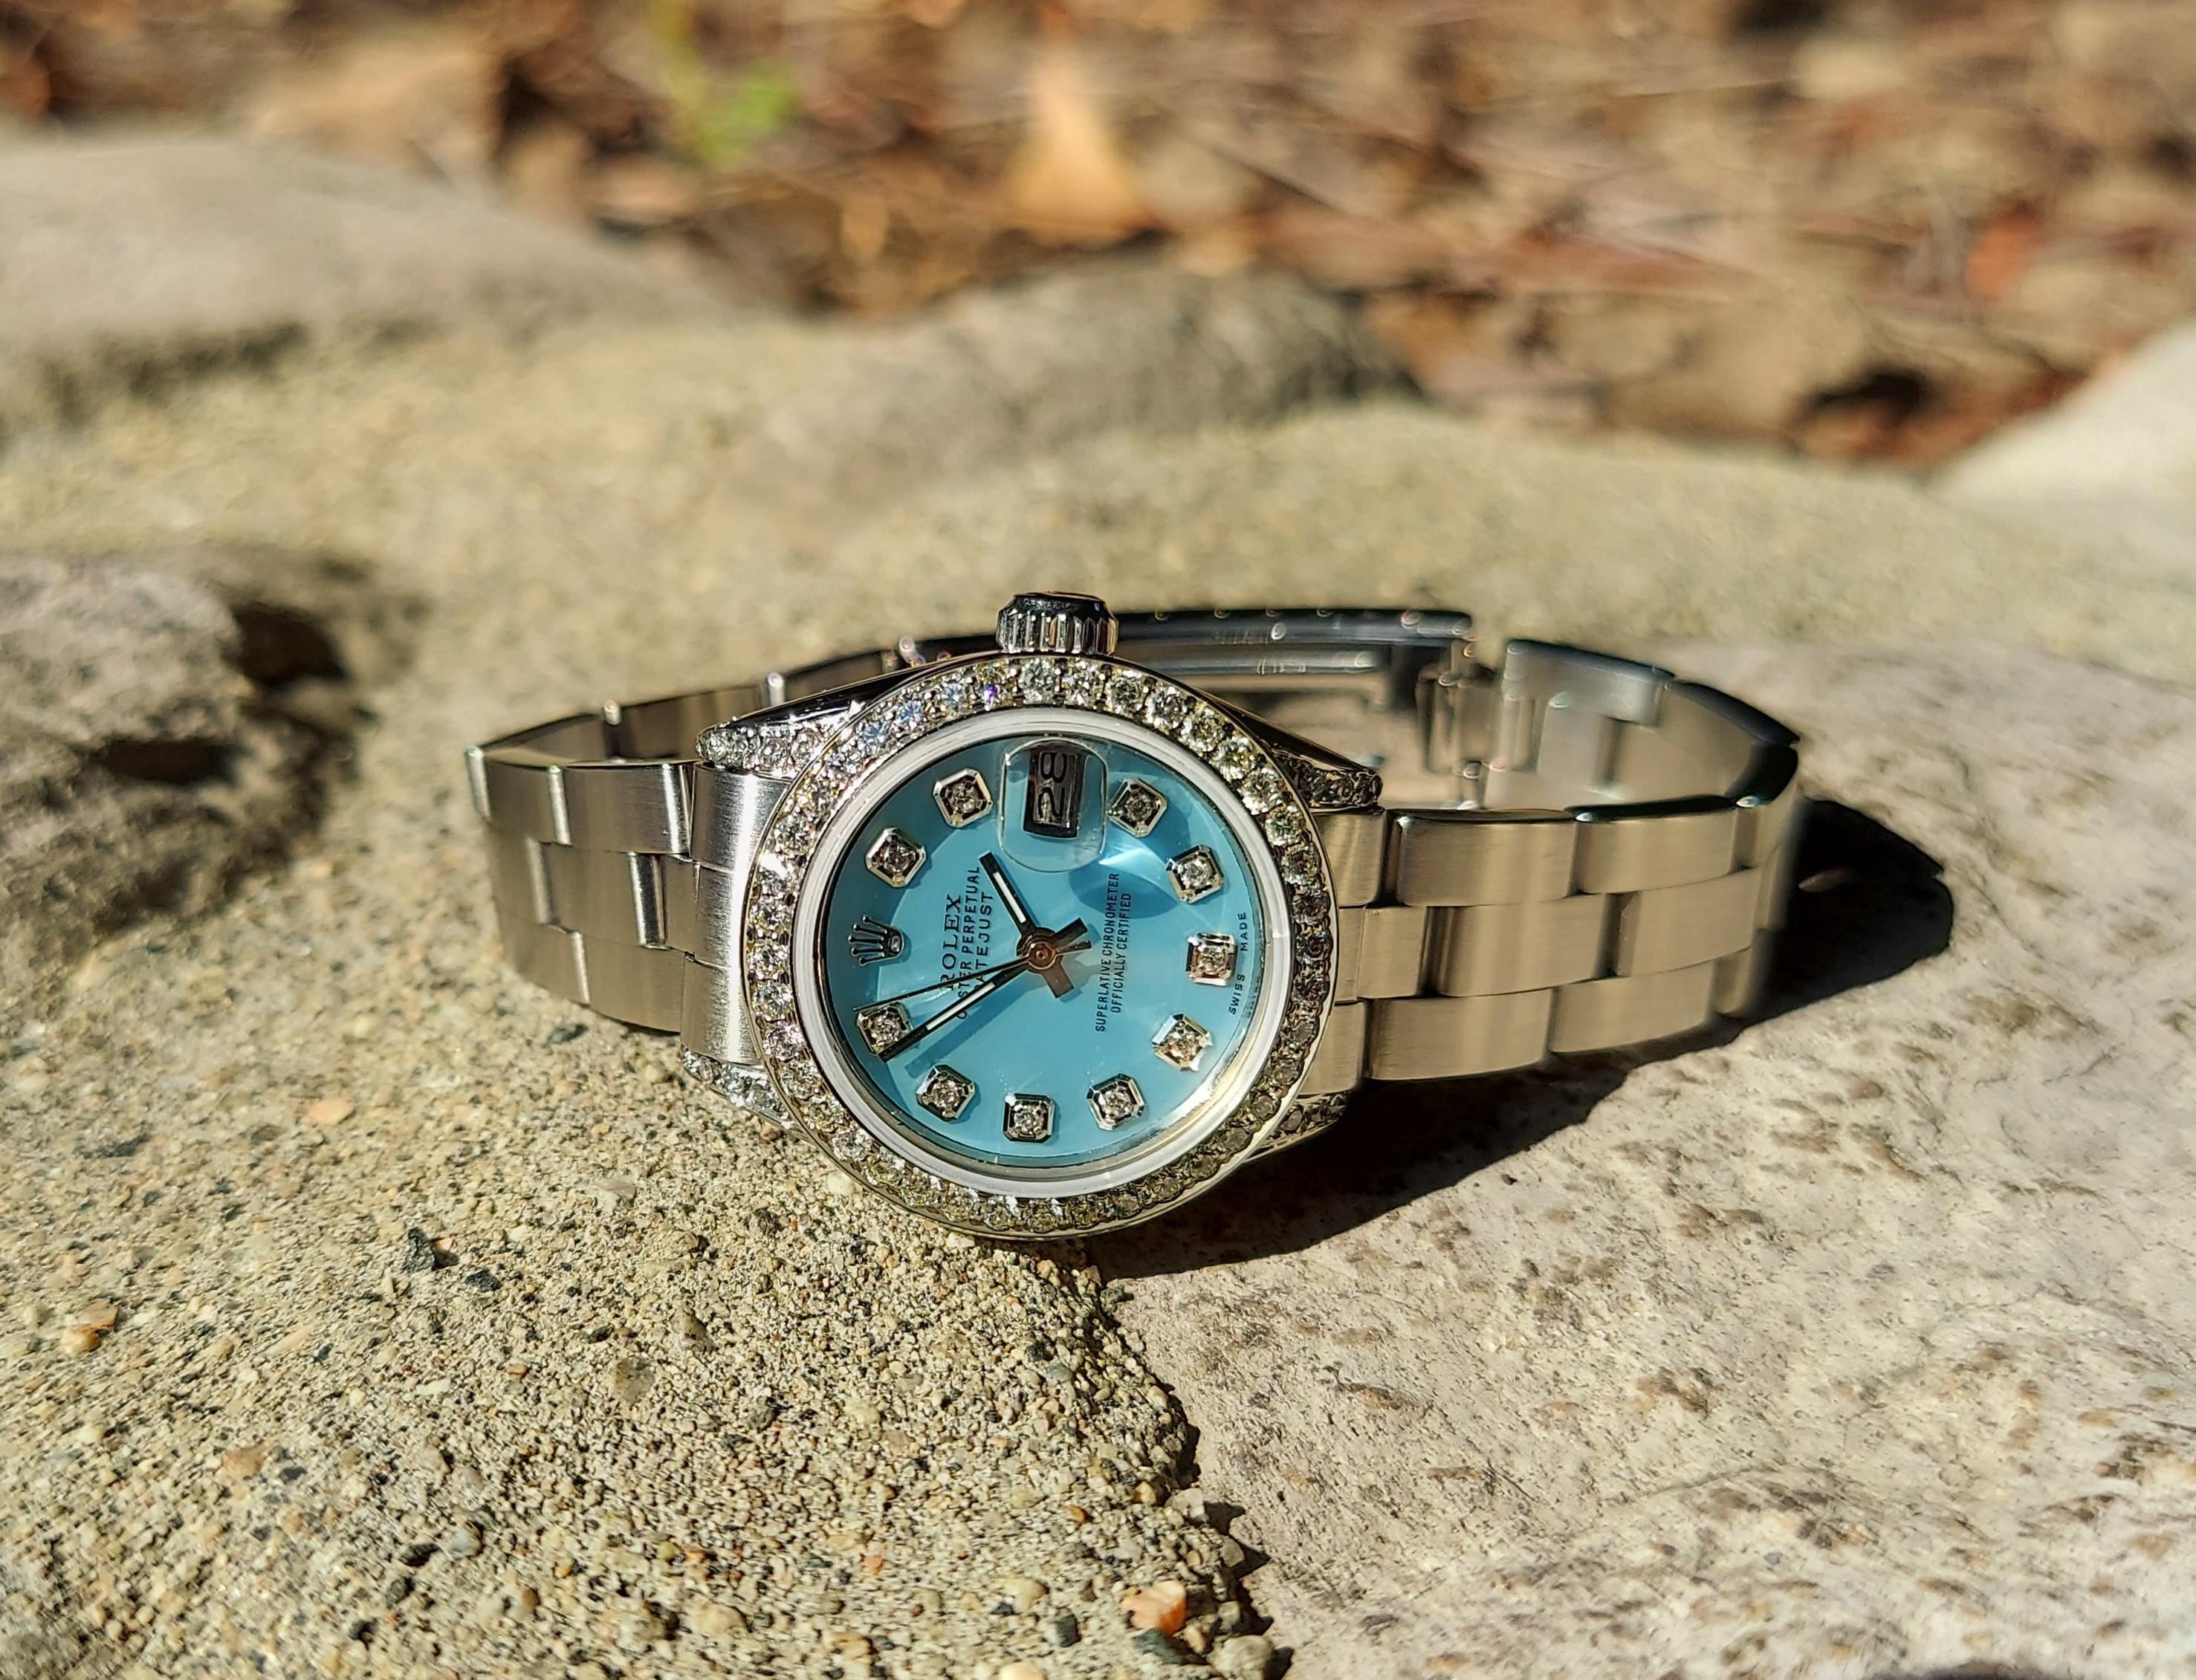 Description
Brand - Rolex
Model - 6917
Style - Datejust 
Case size - 26mm 
Bezel - Custom steel 1.0CT diamond 
Dial -custom MOP diamond 
Crystal- sapphire 
Movement - Rolex Automatic Cal-2030
Band - oyster stainless stee